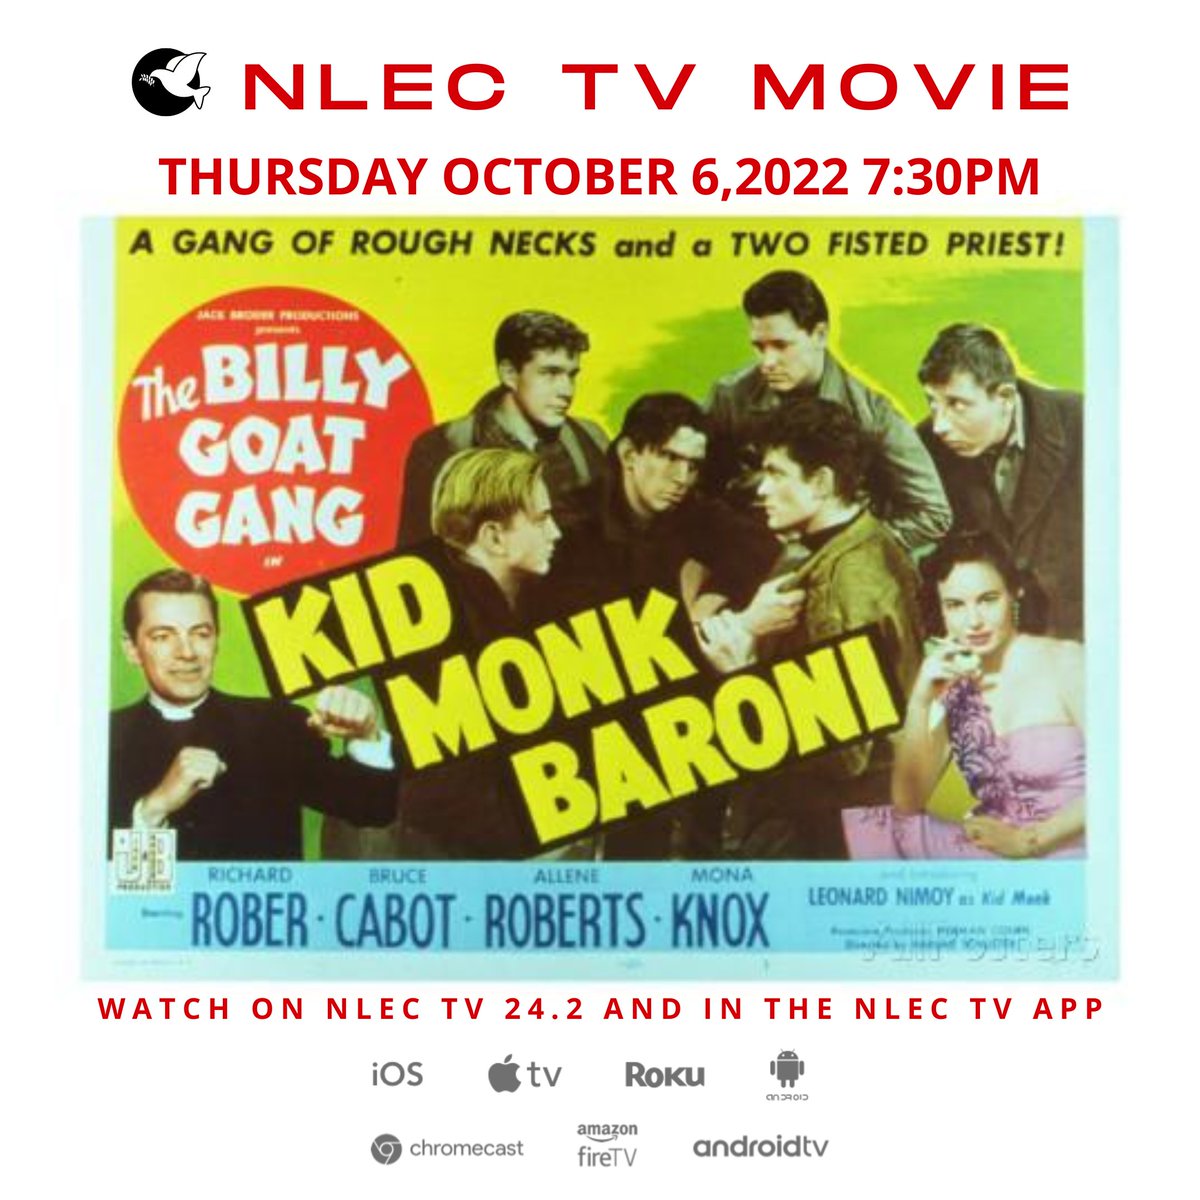 Kid Monk Baroni, the leader of a street gang, becomes a professional boxer to escape his life in Little Italy, New York. #KidMonkBaroni #LeonardNimoy #BruceCabot #actionmovie #dramamovie #boxingmovie #classicmovie #classicmovies #movie #movies
nlec.tv/movies/